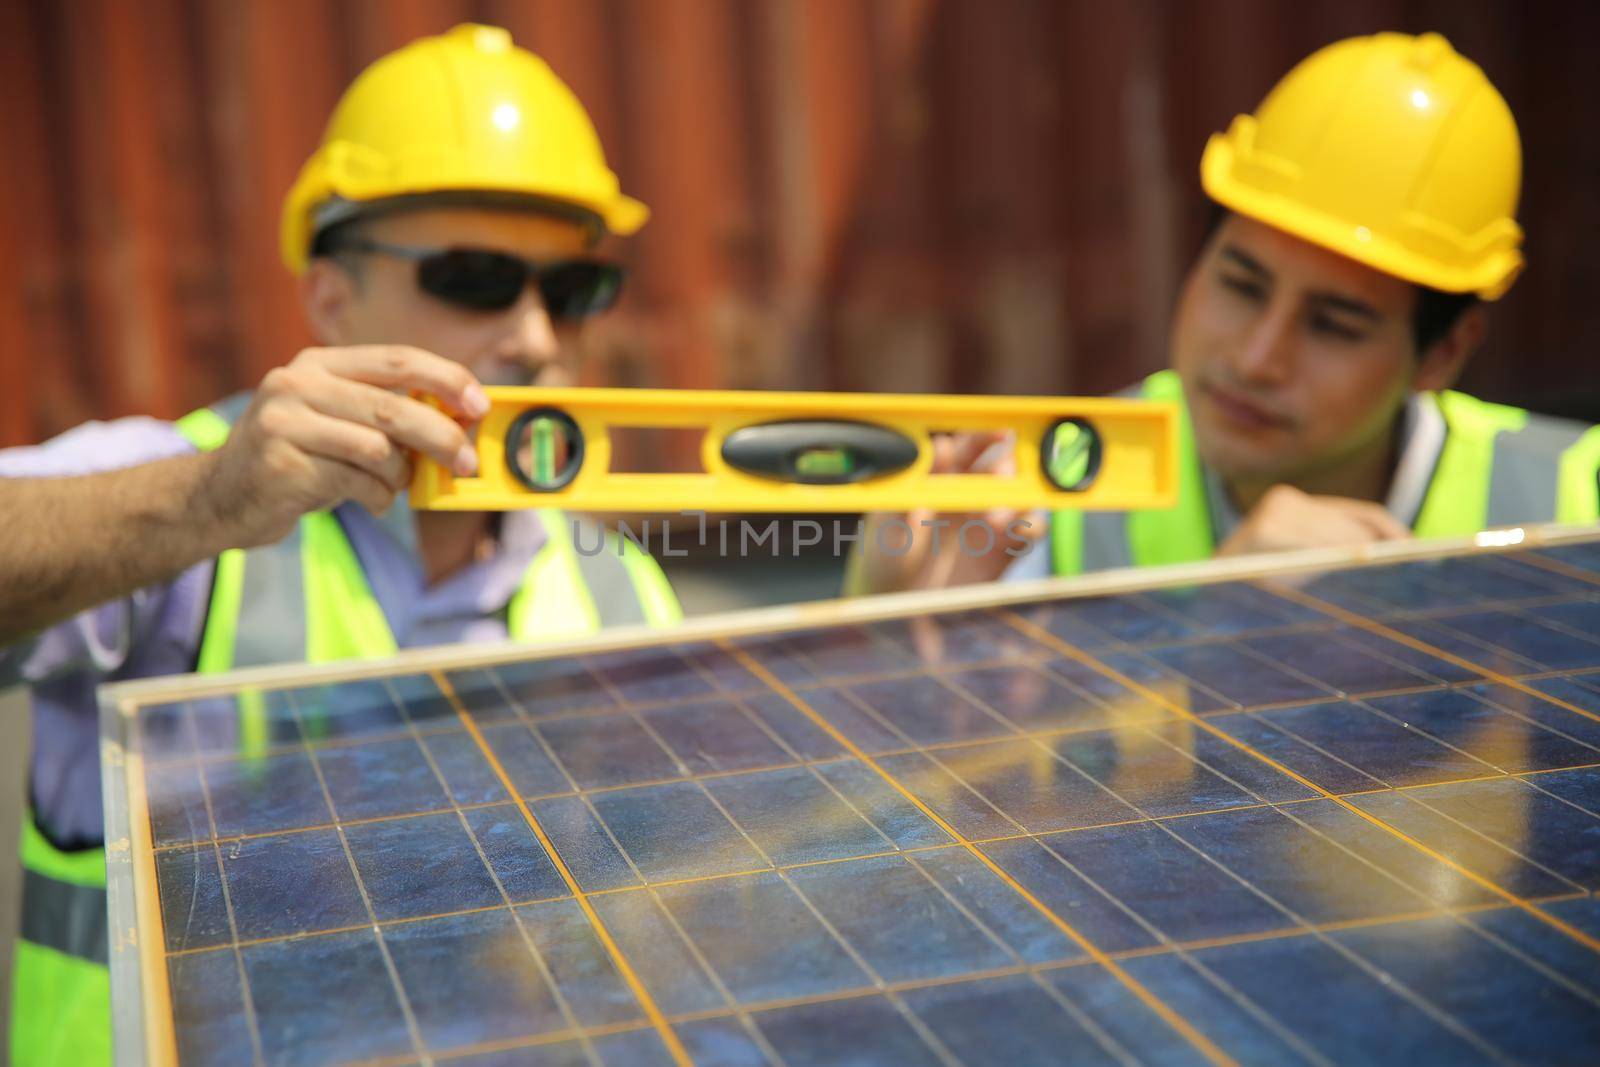 technicians install panels Solar cells to produce and distribute electricity. Energy technology concept by chuanchai